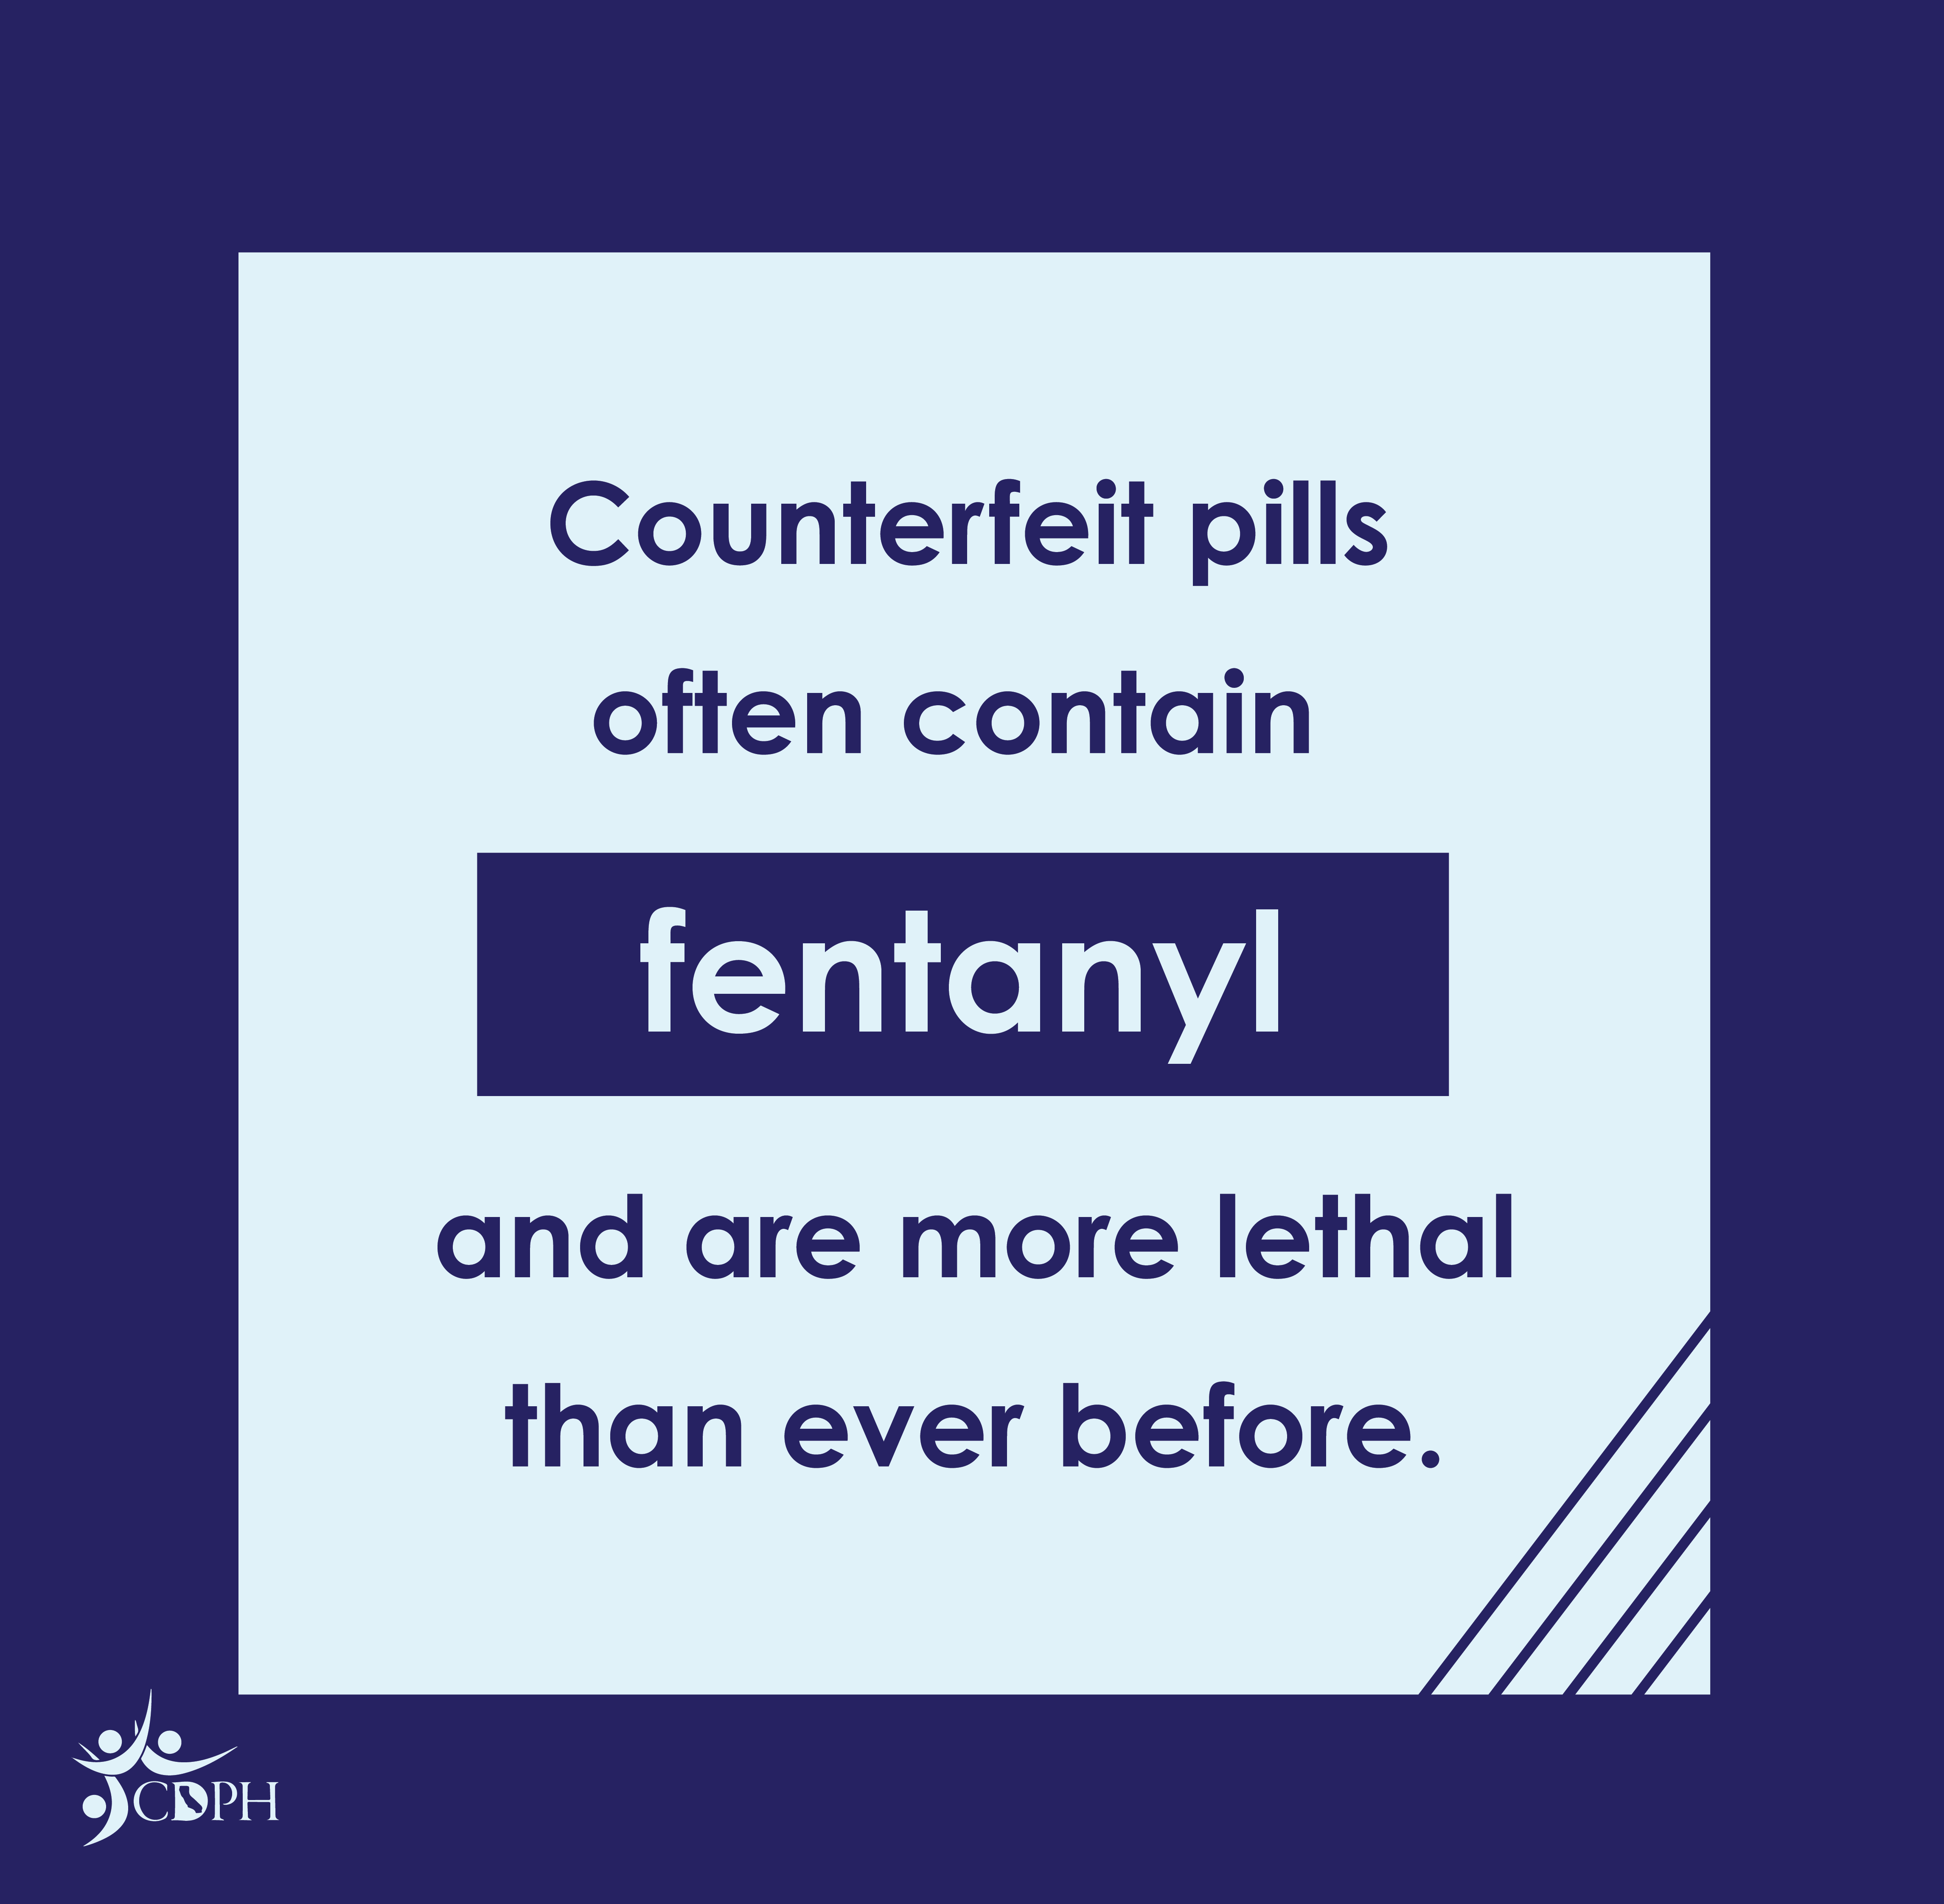 Counterfeit pills often contain fentanyl and are more lethal than ever before.